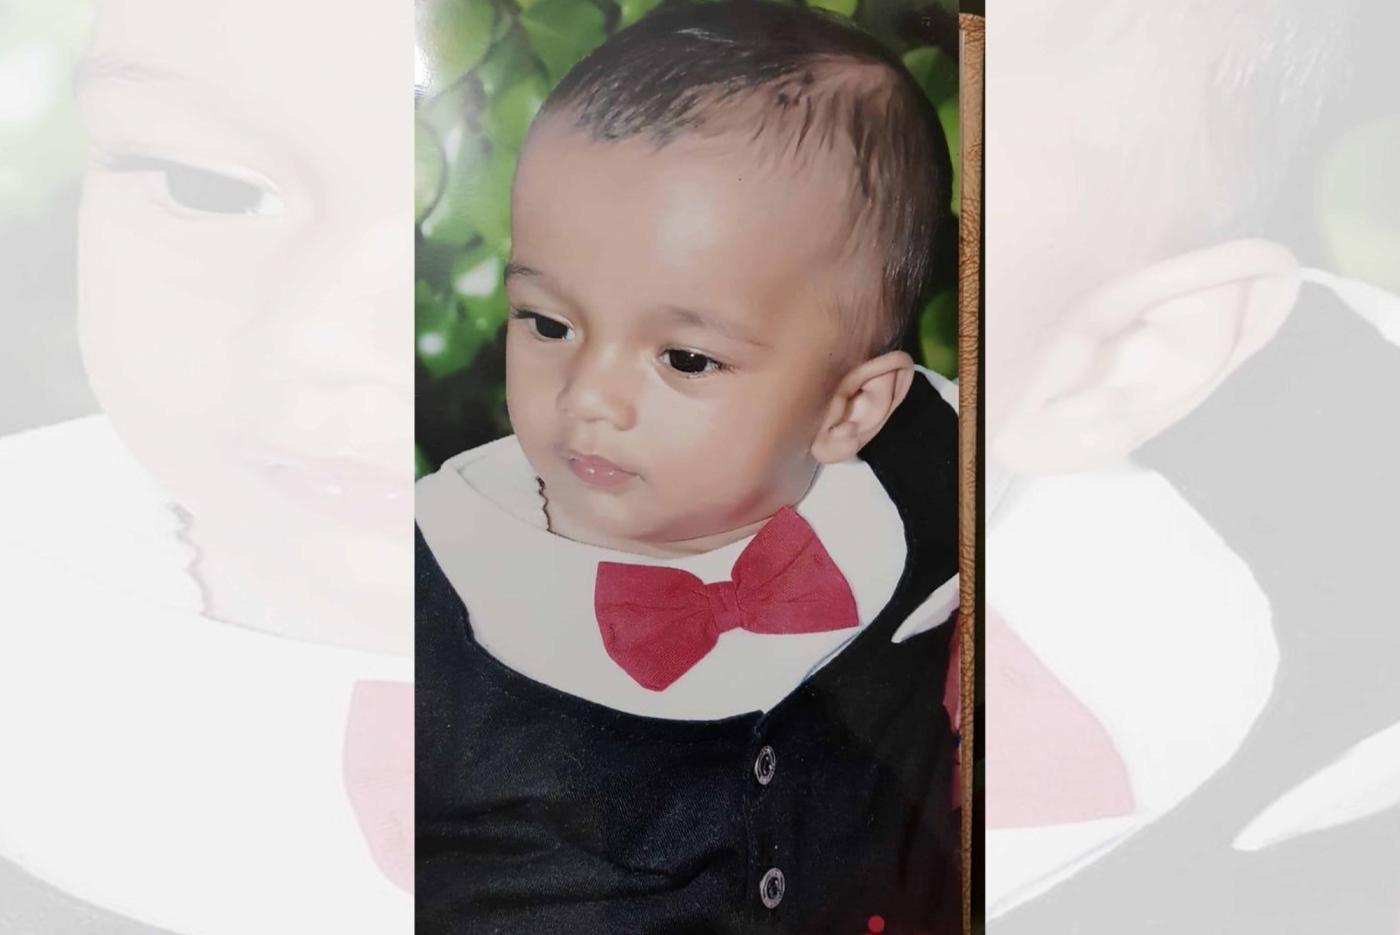 Sangrur: Fatehveer Singh, a two-year-old boy who fell into a 150-foot narrow abandoned borewell in a village in Punjab's Sangrur district over 24 hours ago, on June 7, 2019. Efforts were underway on Friday to rescue the child. The child is believed to be stuck at a depth of 110 feet in the borewell that has a nine-inch diameter. (File Photo: IANS) by .